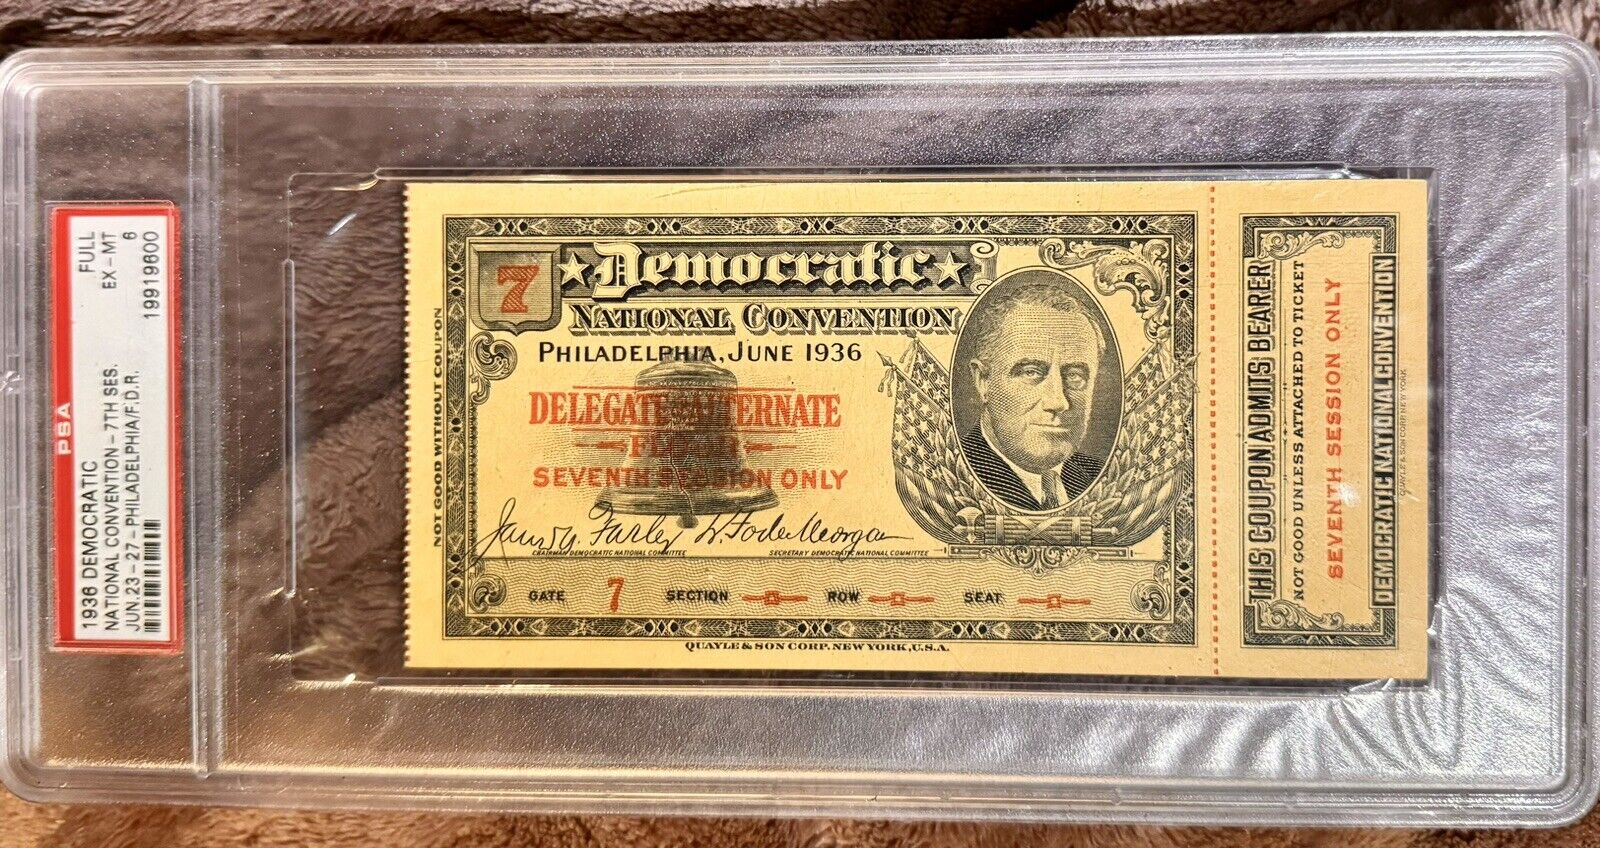 1936 Democratic National Convention  - 7th SES.   FDR  ROOSEVELT  Grade 6